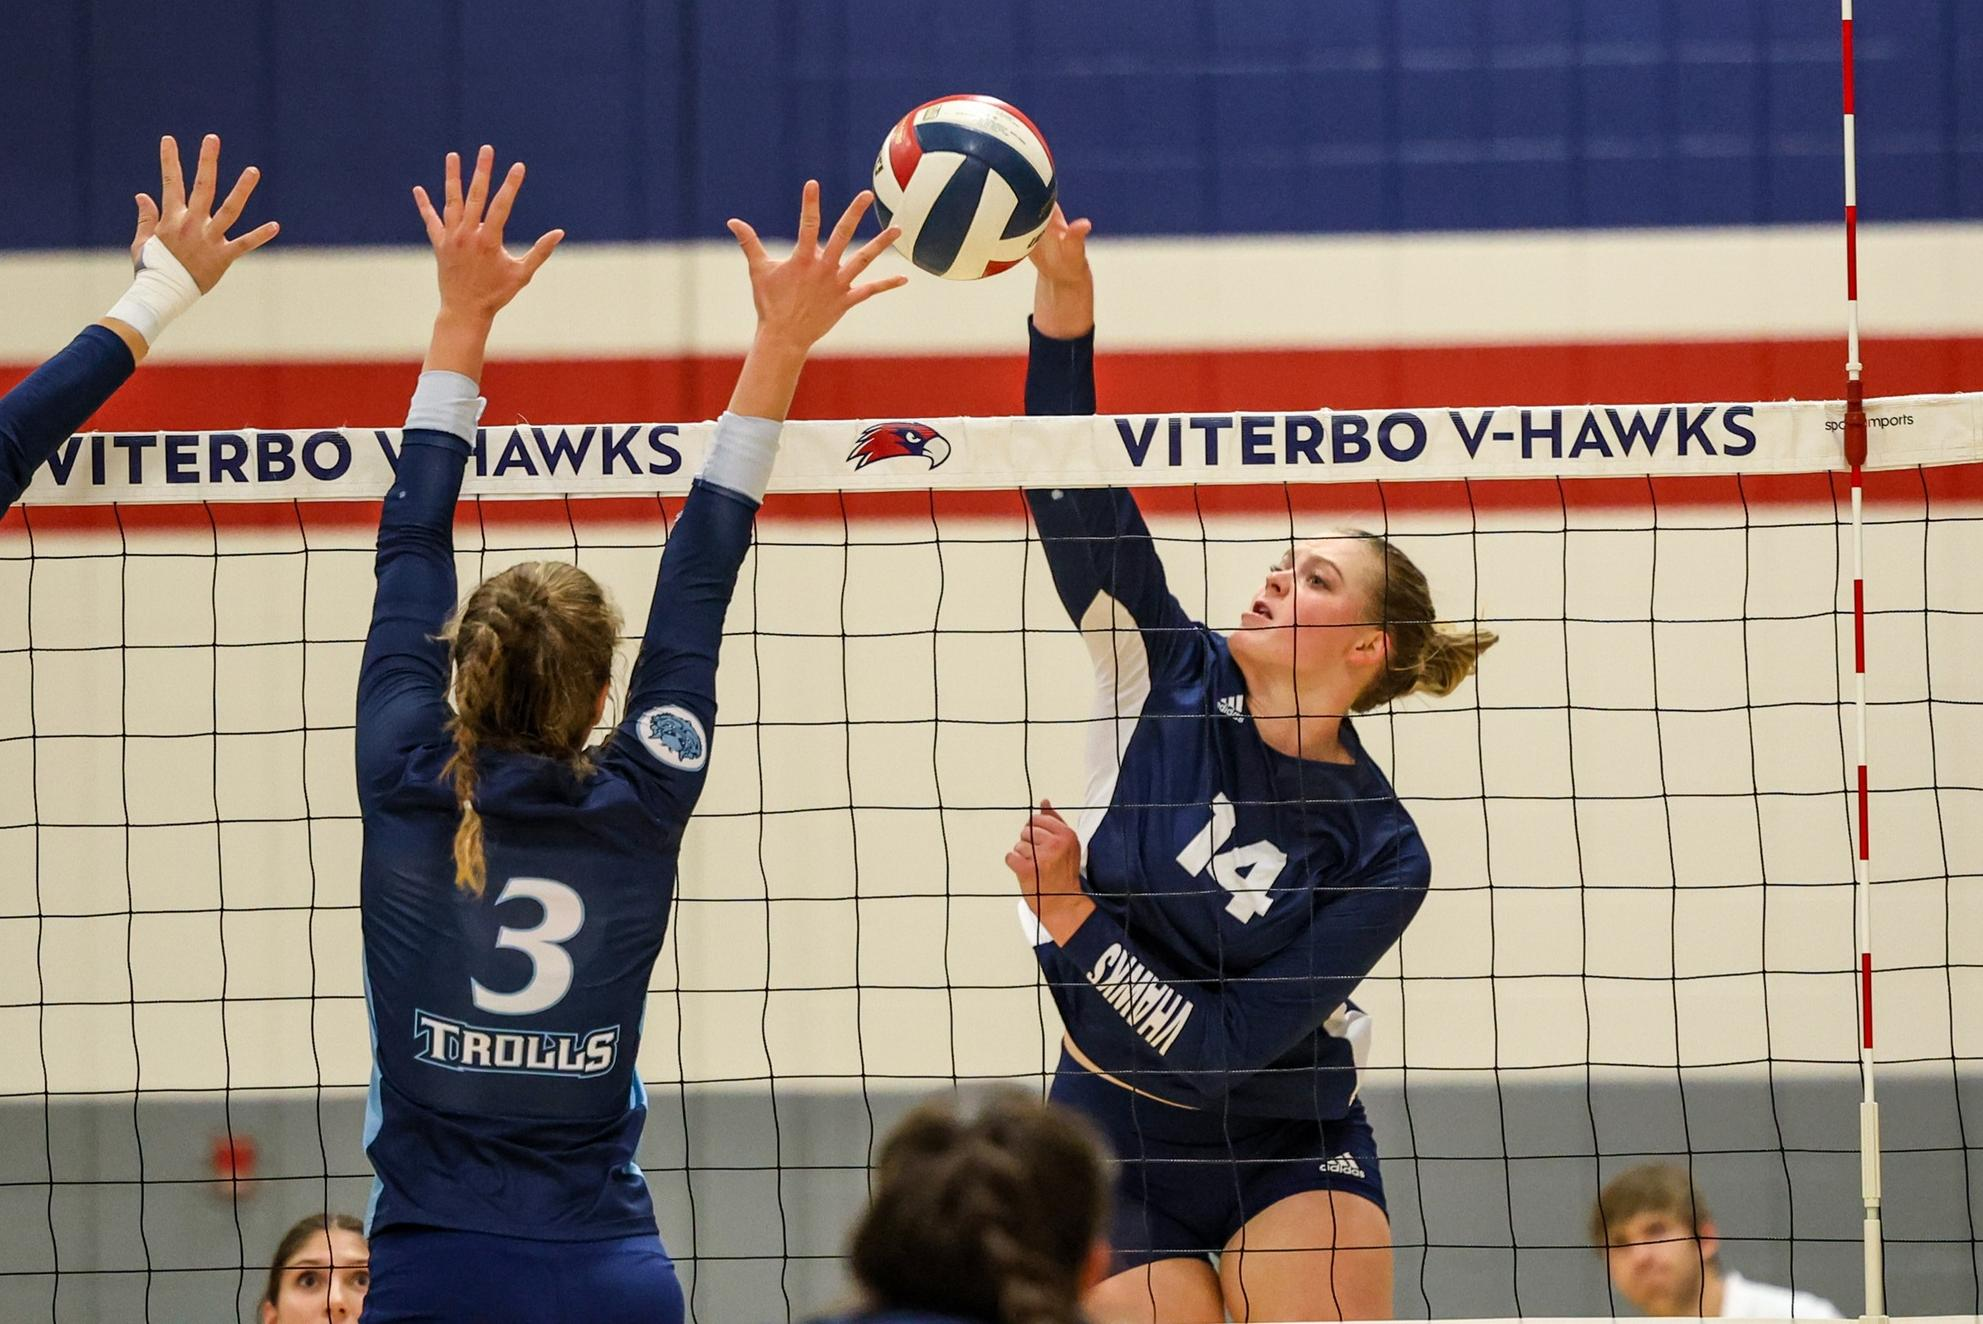 Viterbo women’s volleyball team goes unbeaten in winning third-consecutive conference title